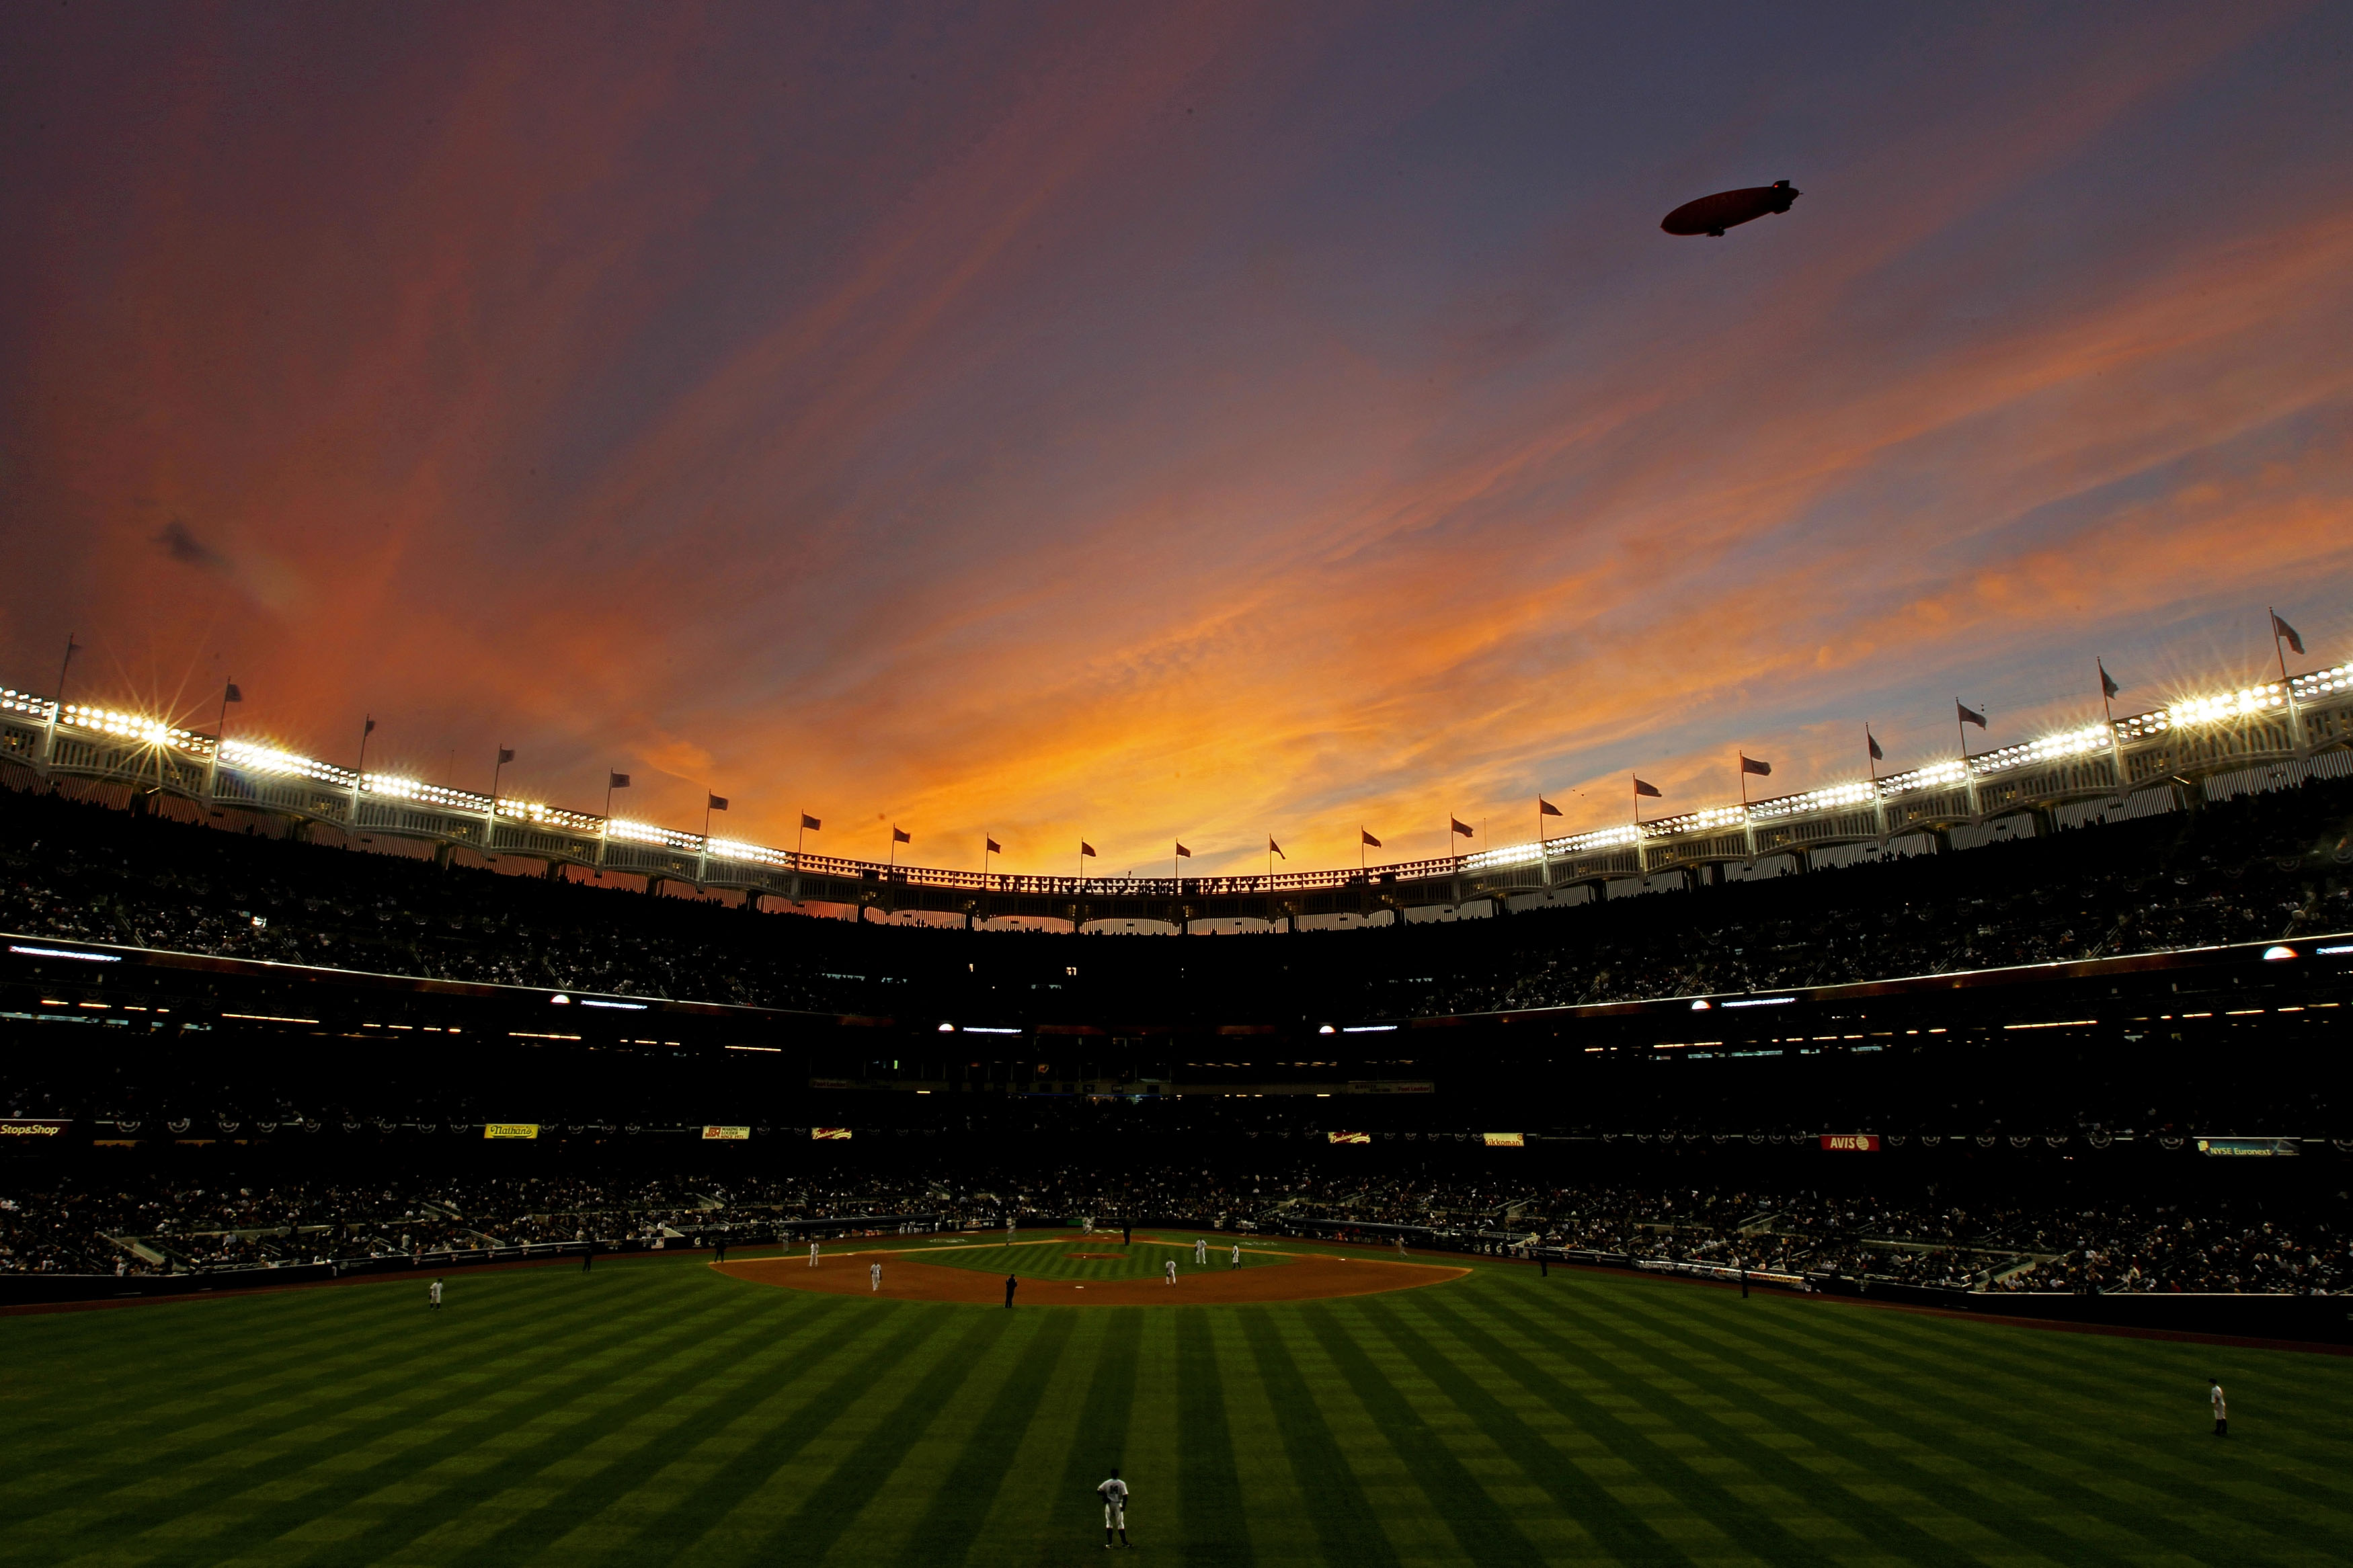 NEW YORK - OCTOBER 20:  The Conan blimp flies over Yankee stadium as the New York Yankees play against the Texas Rangers in Game Five of the ALCS during the 2010 MLB Playoffs at Yankee Stadium on October 20, 2010 in the Bronx borough of New York City.  (P